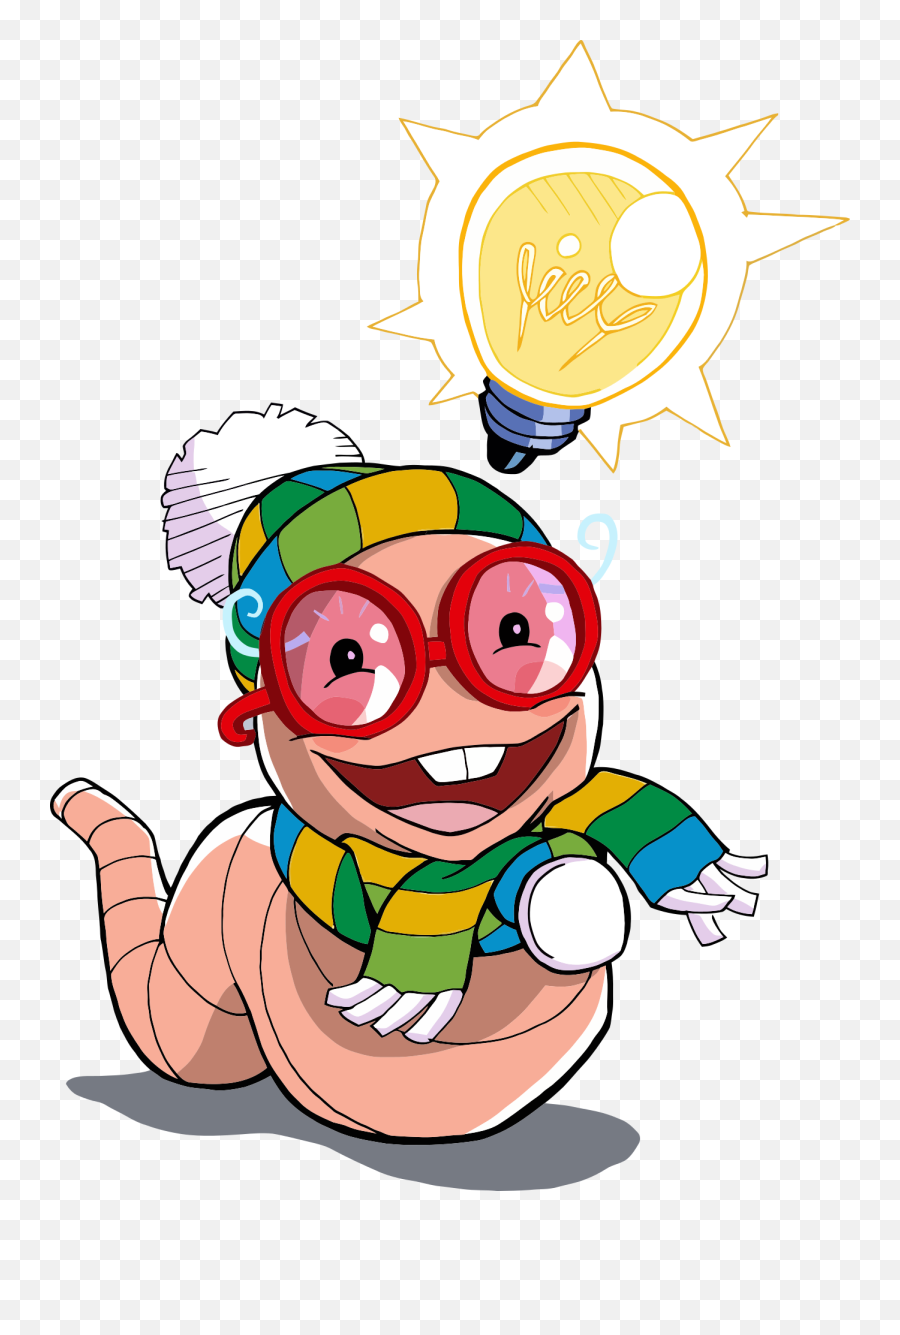 Download Free Photo Of Anthropomorphized Animalscartoon - Nerd Cartoon Characters Png Emoji,Animated Emotions Free